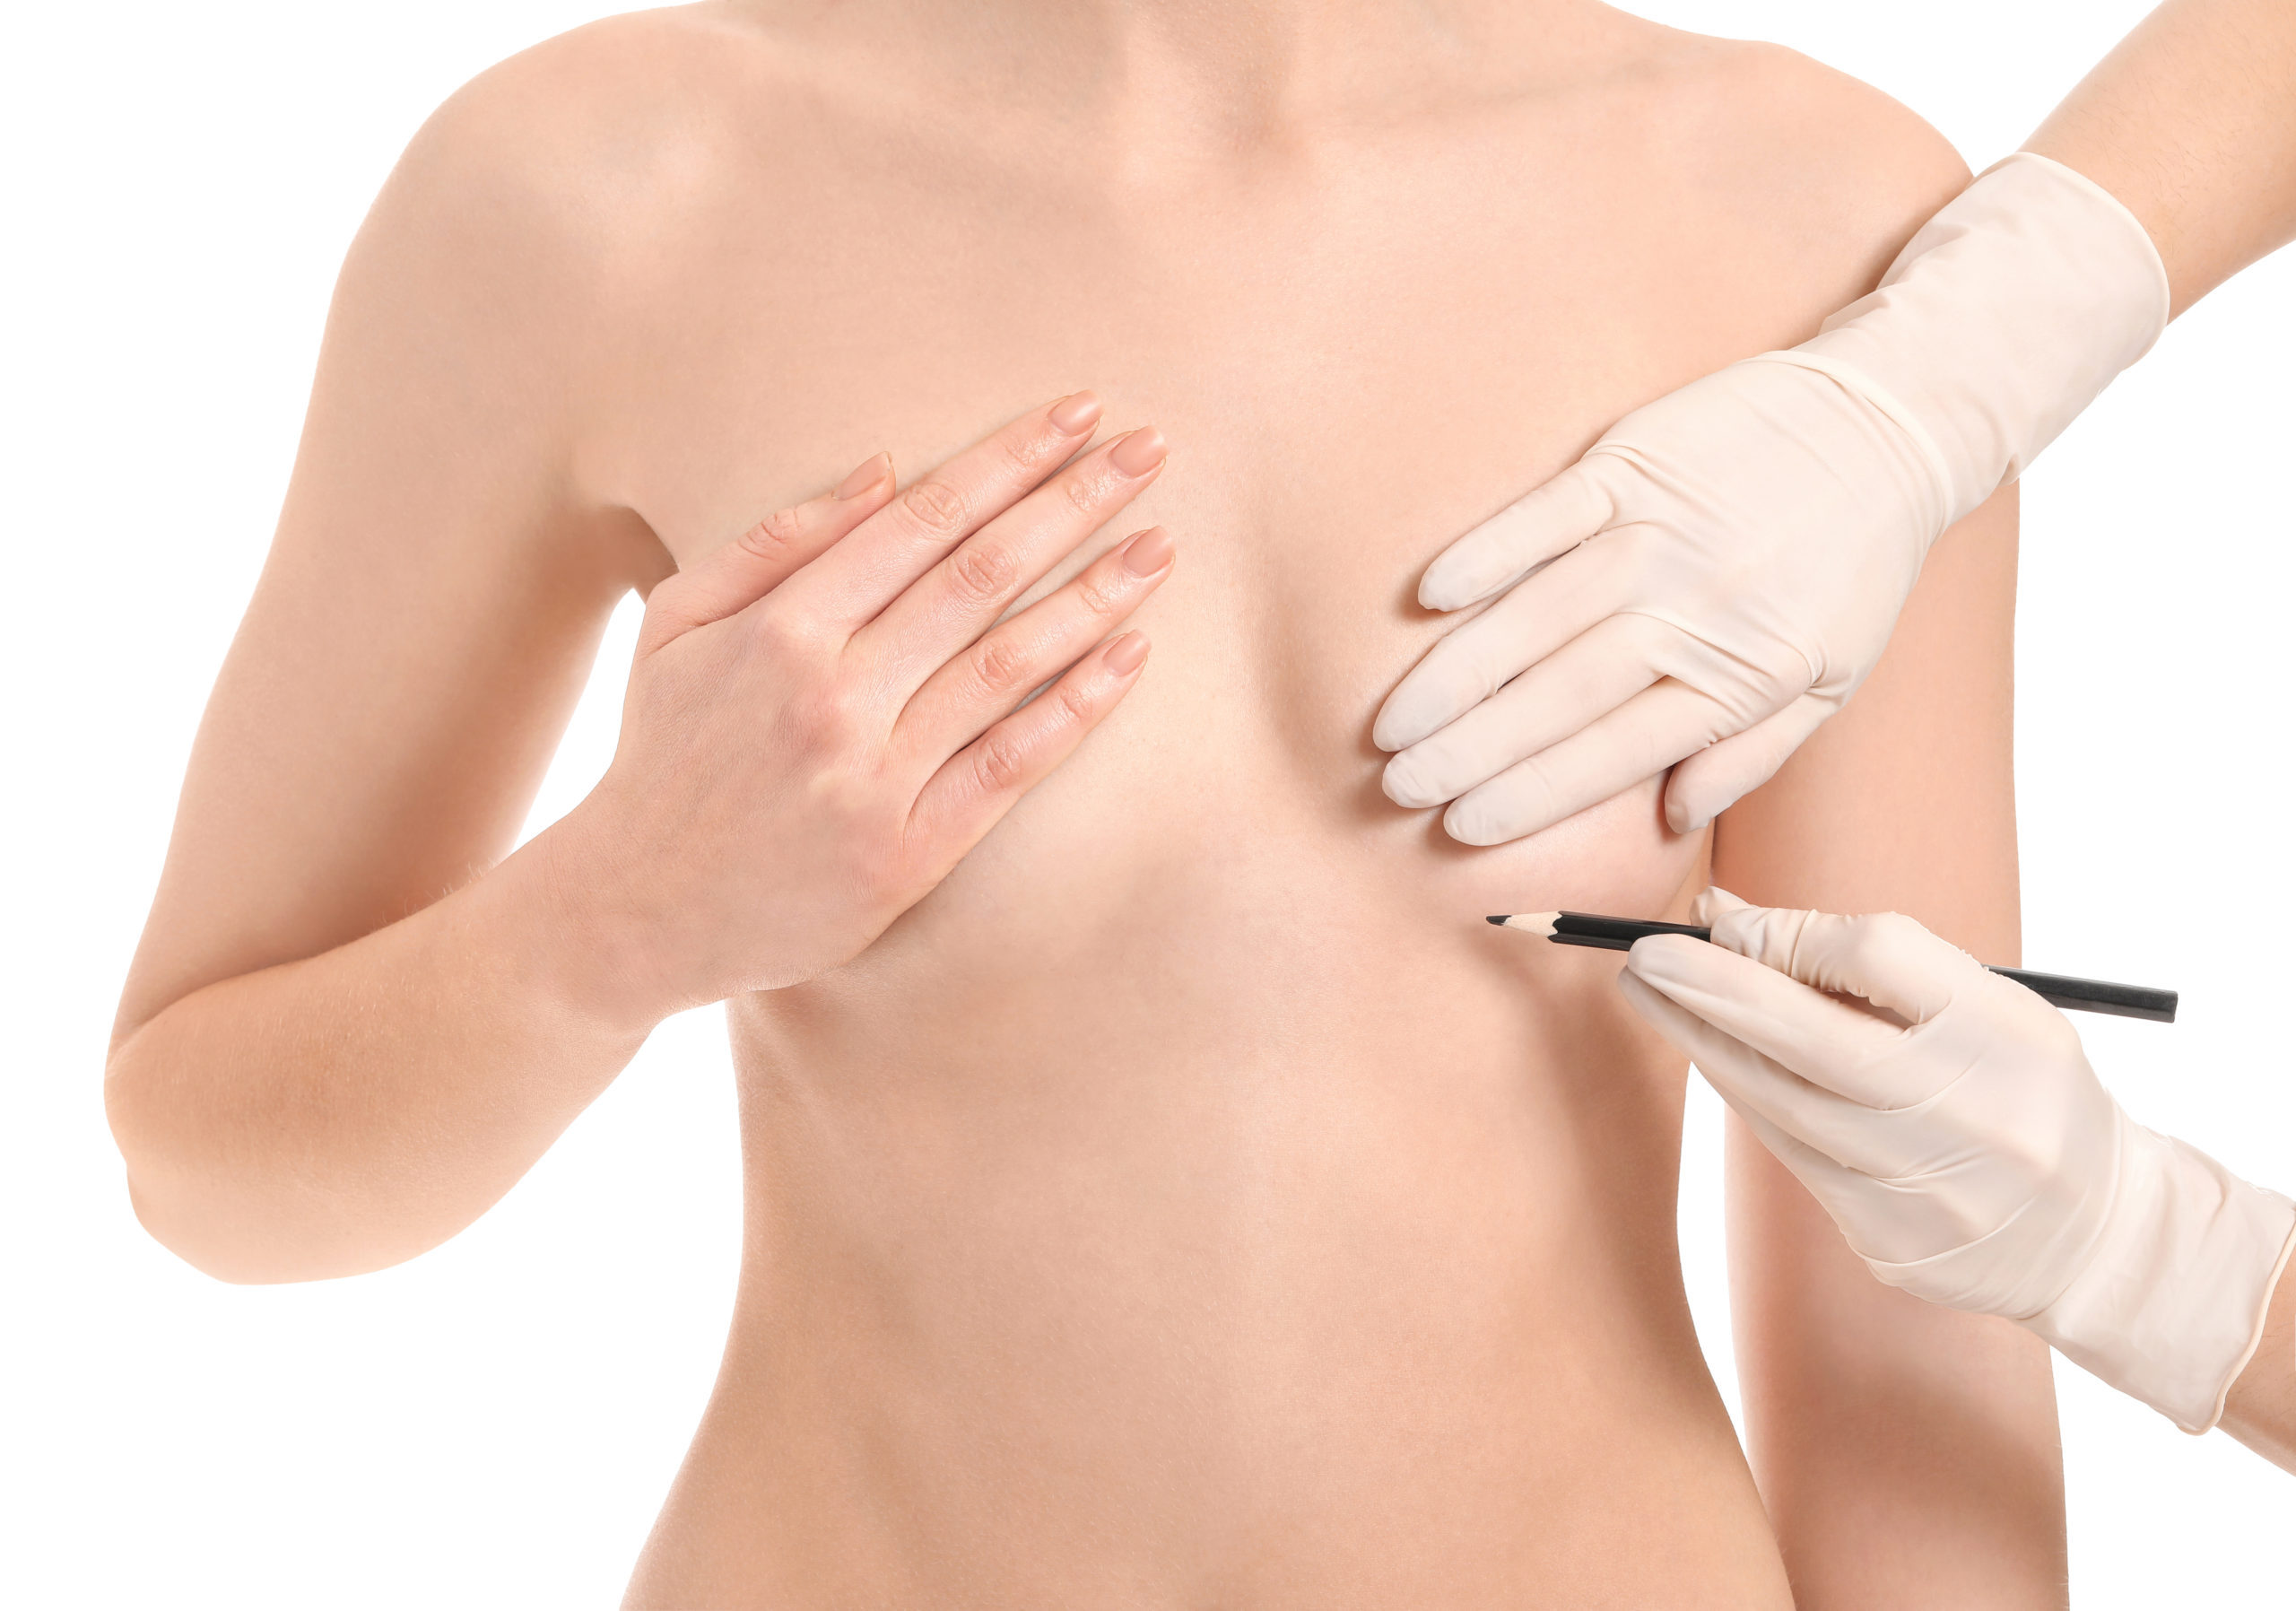 Doctor applying marking on woman's chest against white background. Concept of breast augmentation